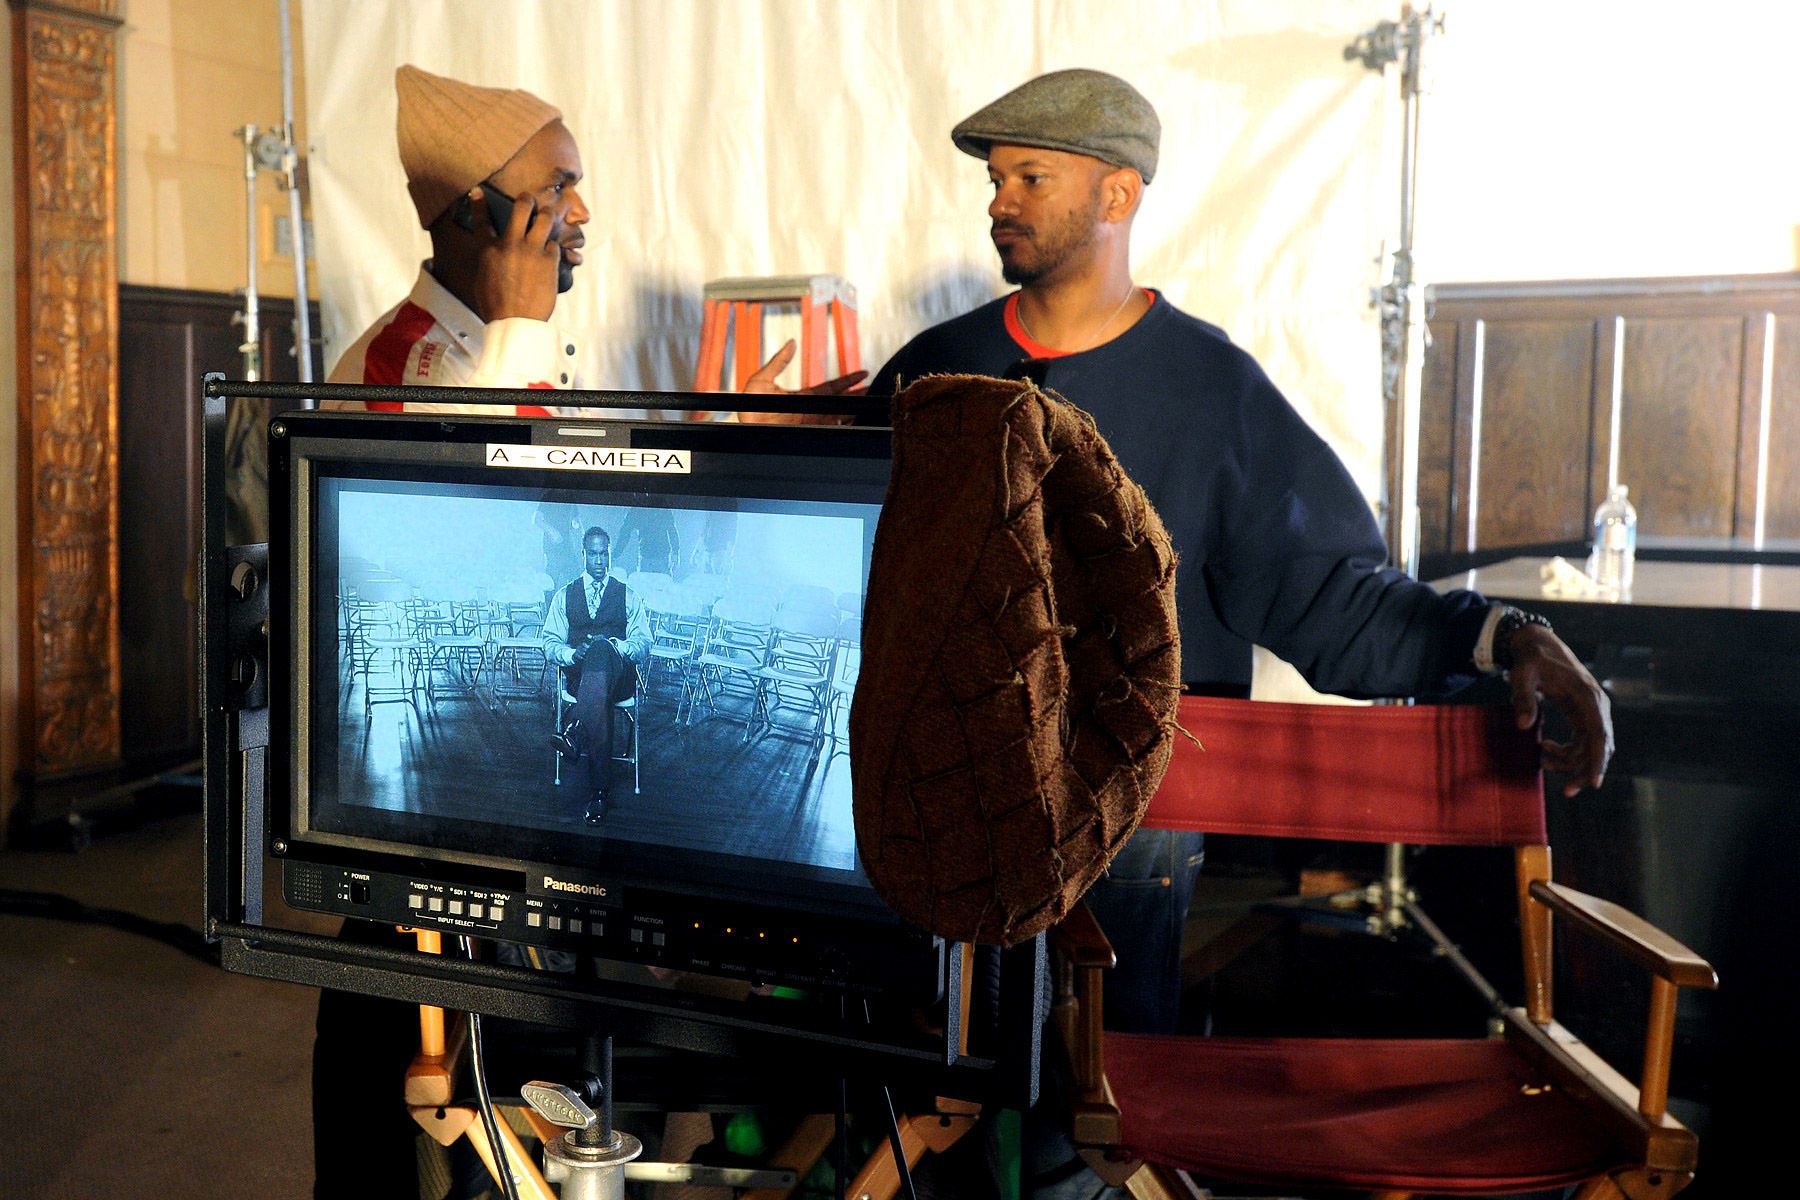 On the set of Leela James' music video for "Tell Me You Love Me" shot for Concord Music Group.